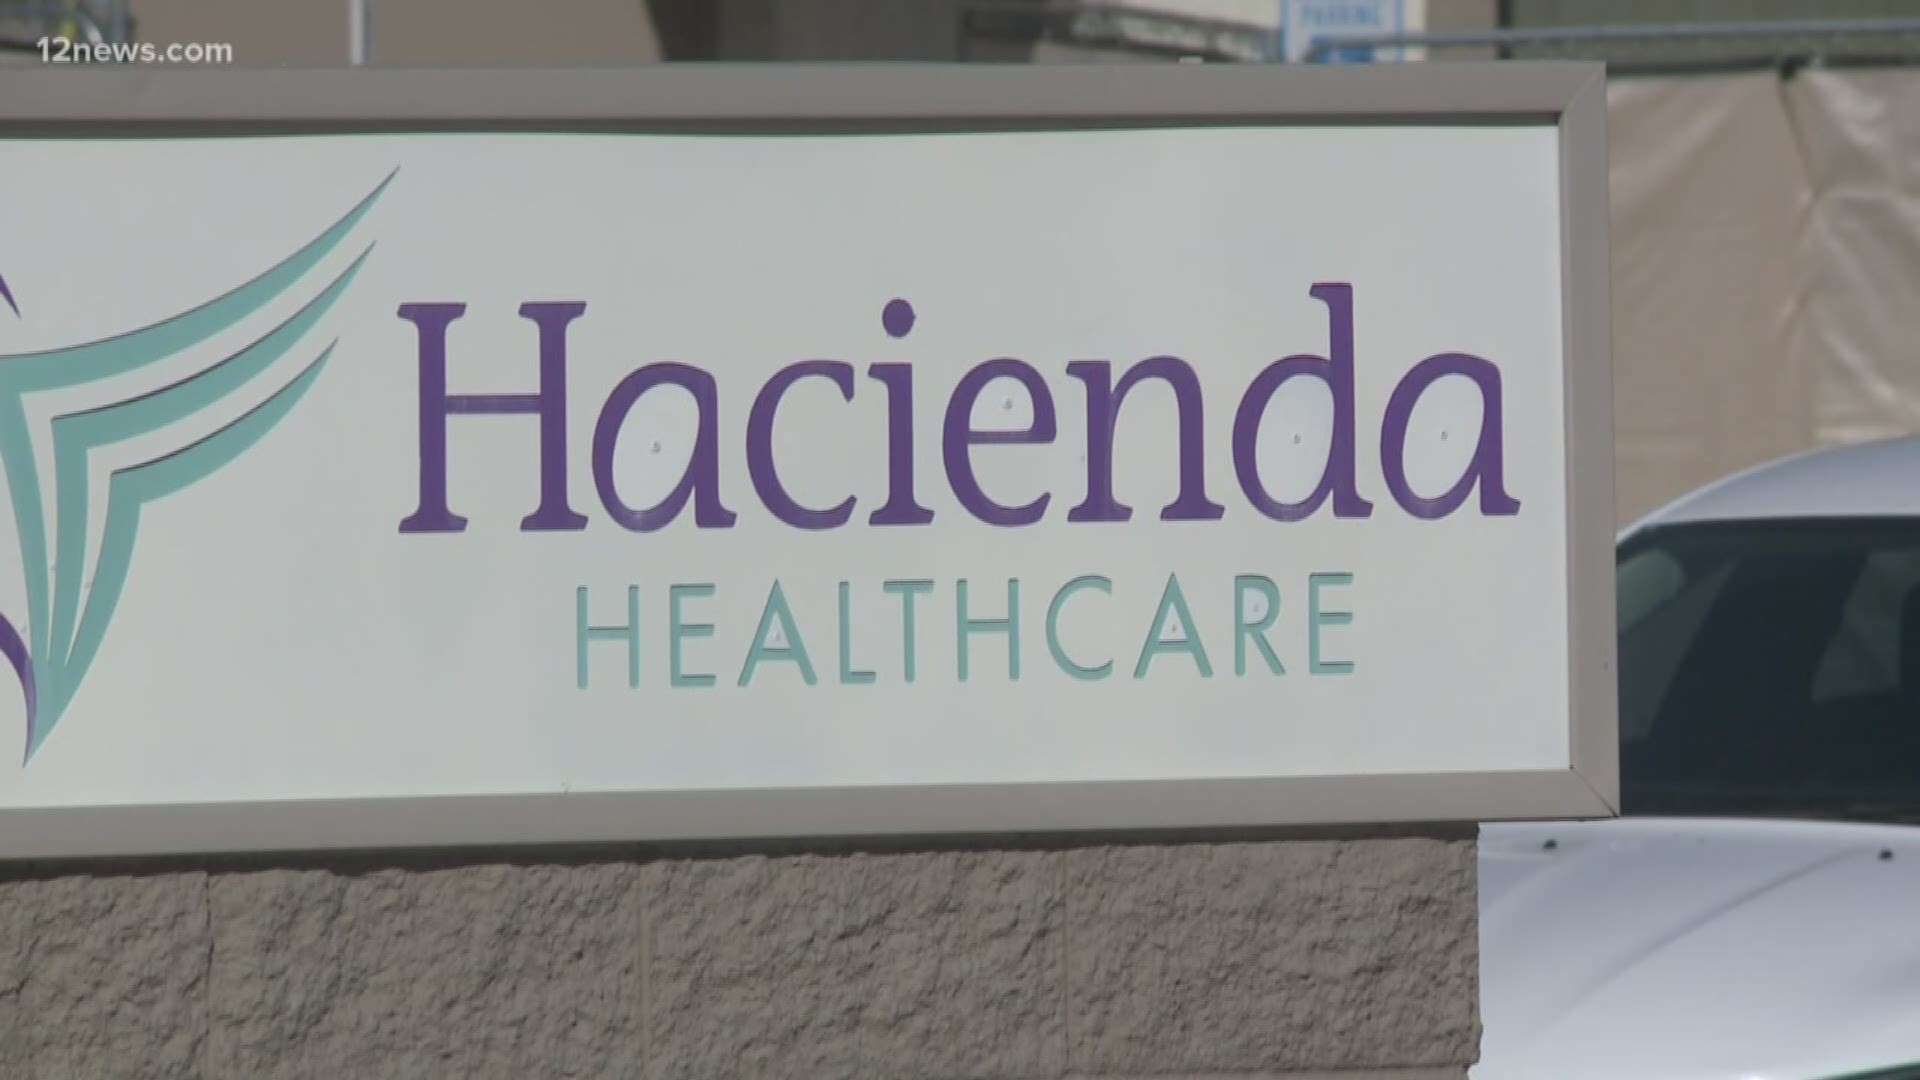 Breaking this afternoon, Phoenix PD is serving search warrants to male employees at Hacienda Healthcare, the facility where a woman in a vegetative state gave birth last month. Families currently at the facility are looking for alternative housing situations for their loved ones still at the facility.